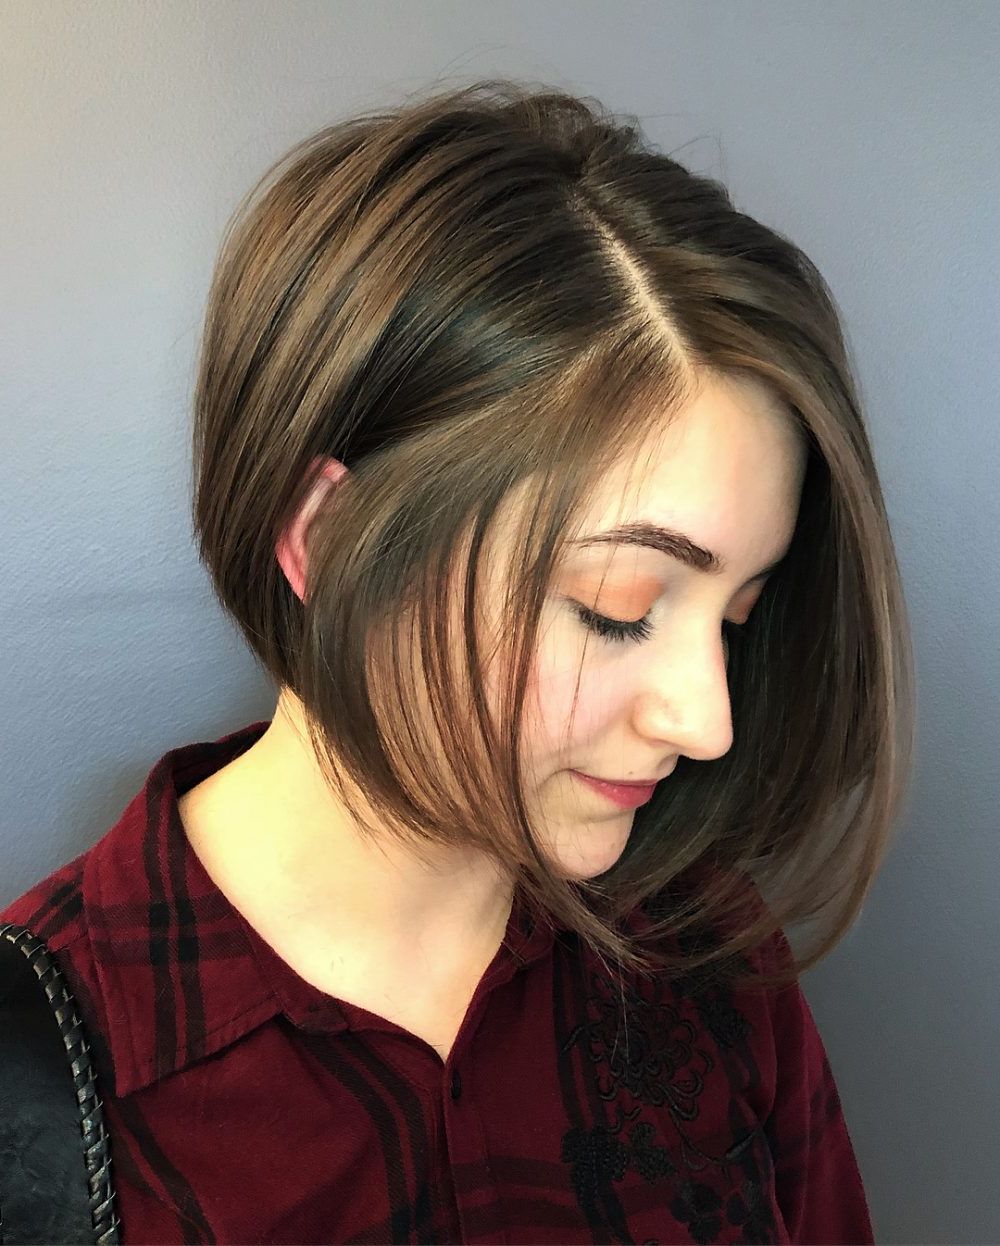 33 Flattering Short Hairstyles For Round Faces In 2018 Intended For Short Hairstyles For Full Round Faces (View 3 of 25)